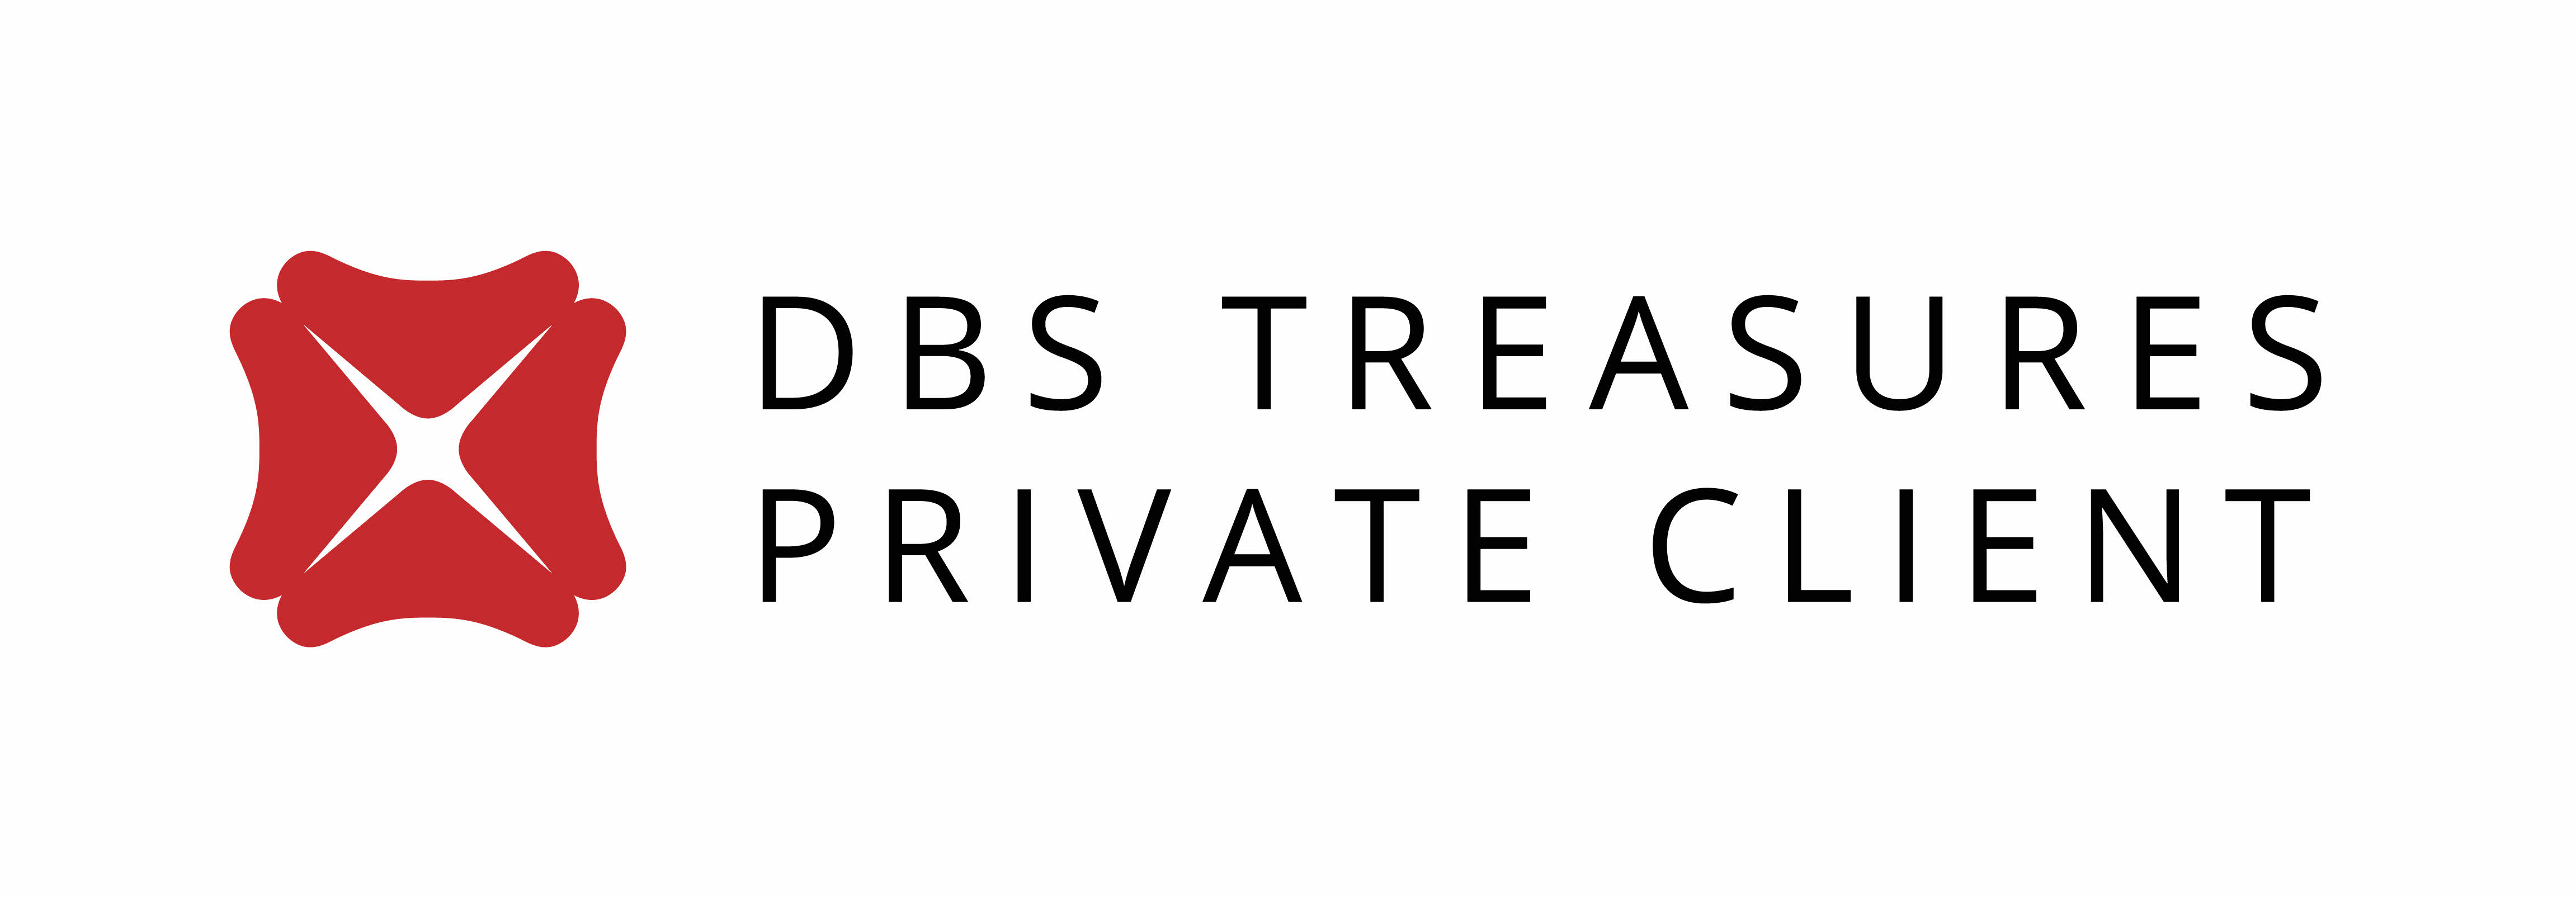 DBS Treasures Private Client